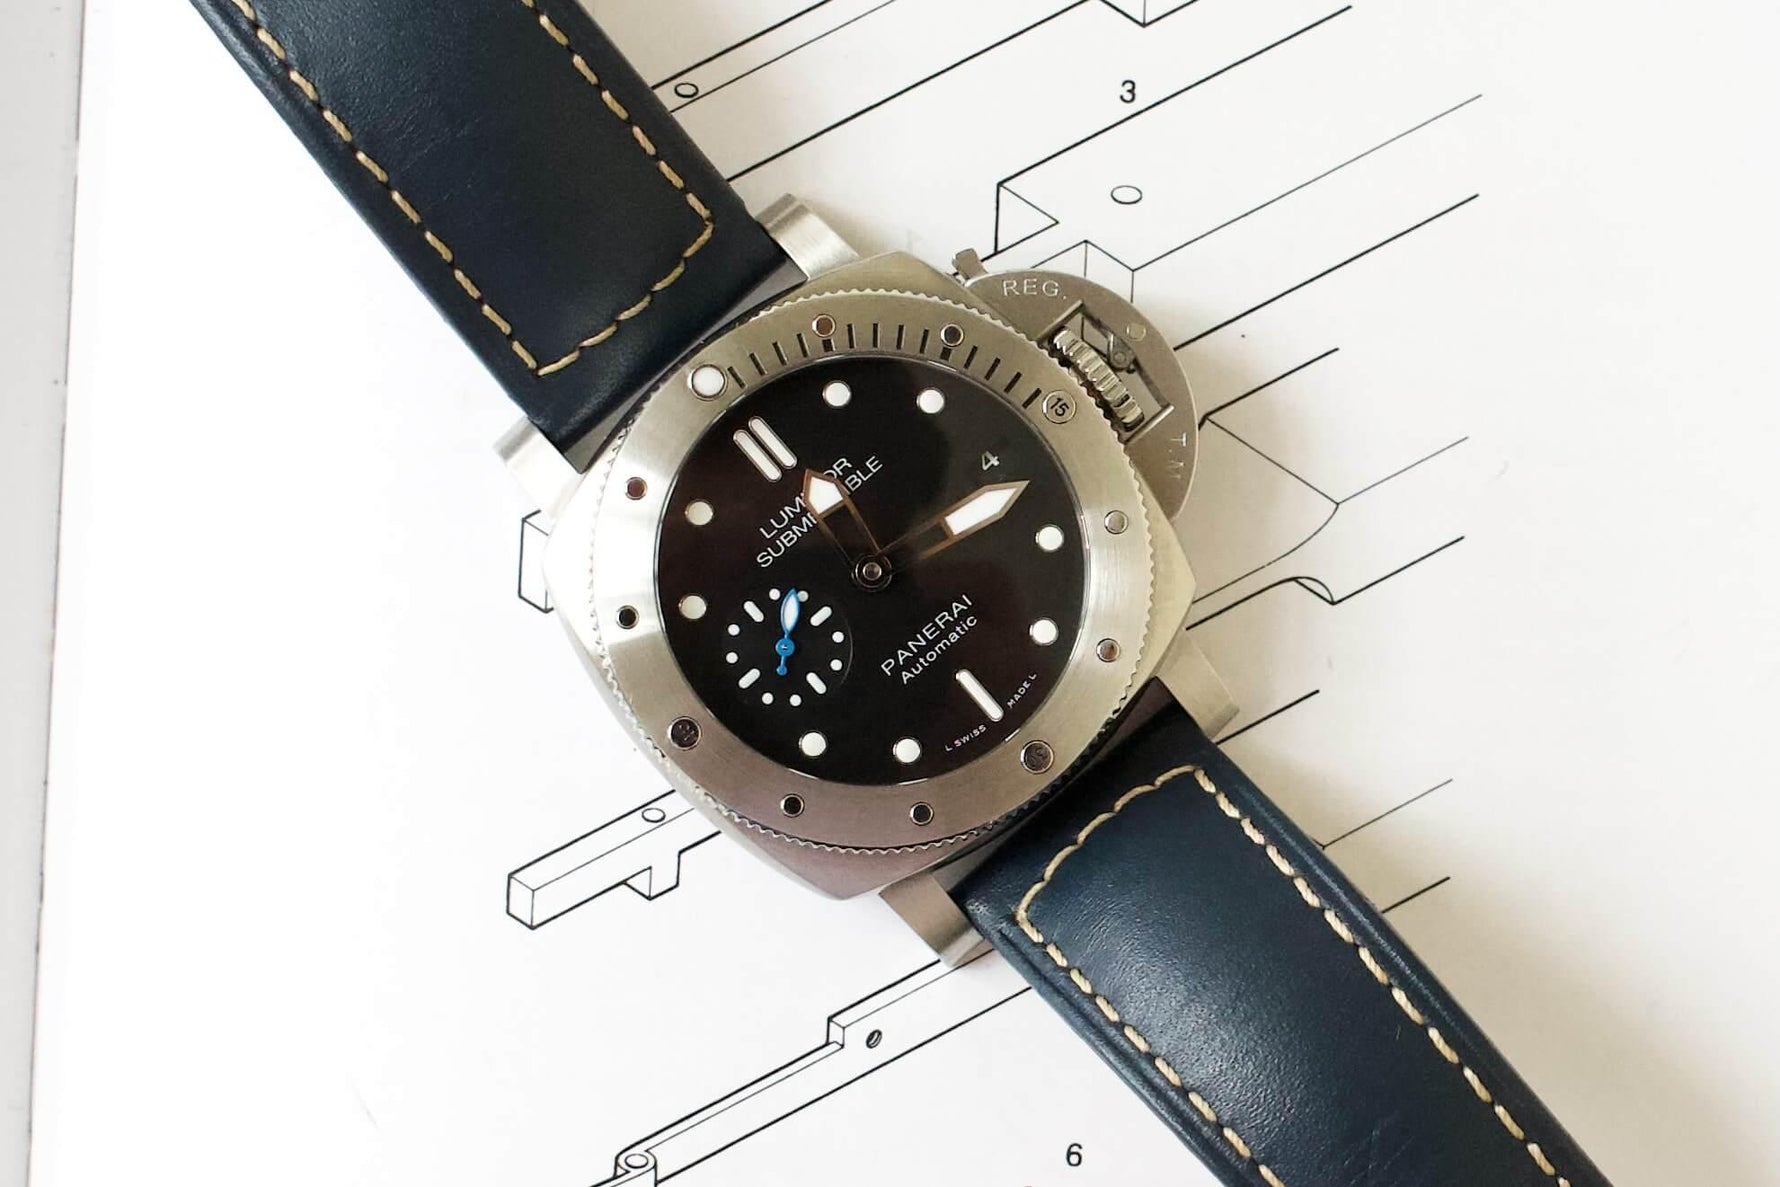 SOLD OUT: Panerai Luminor Submersible 1950 3 Days Automatic Acciaio 42mm PAM 682 - WearingTime Luxury Watches